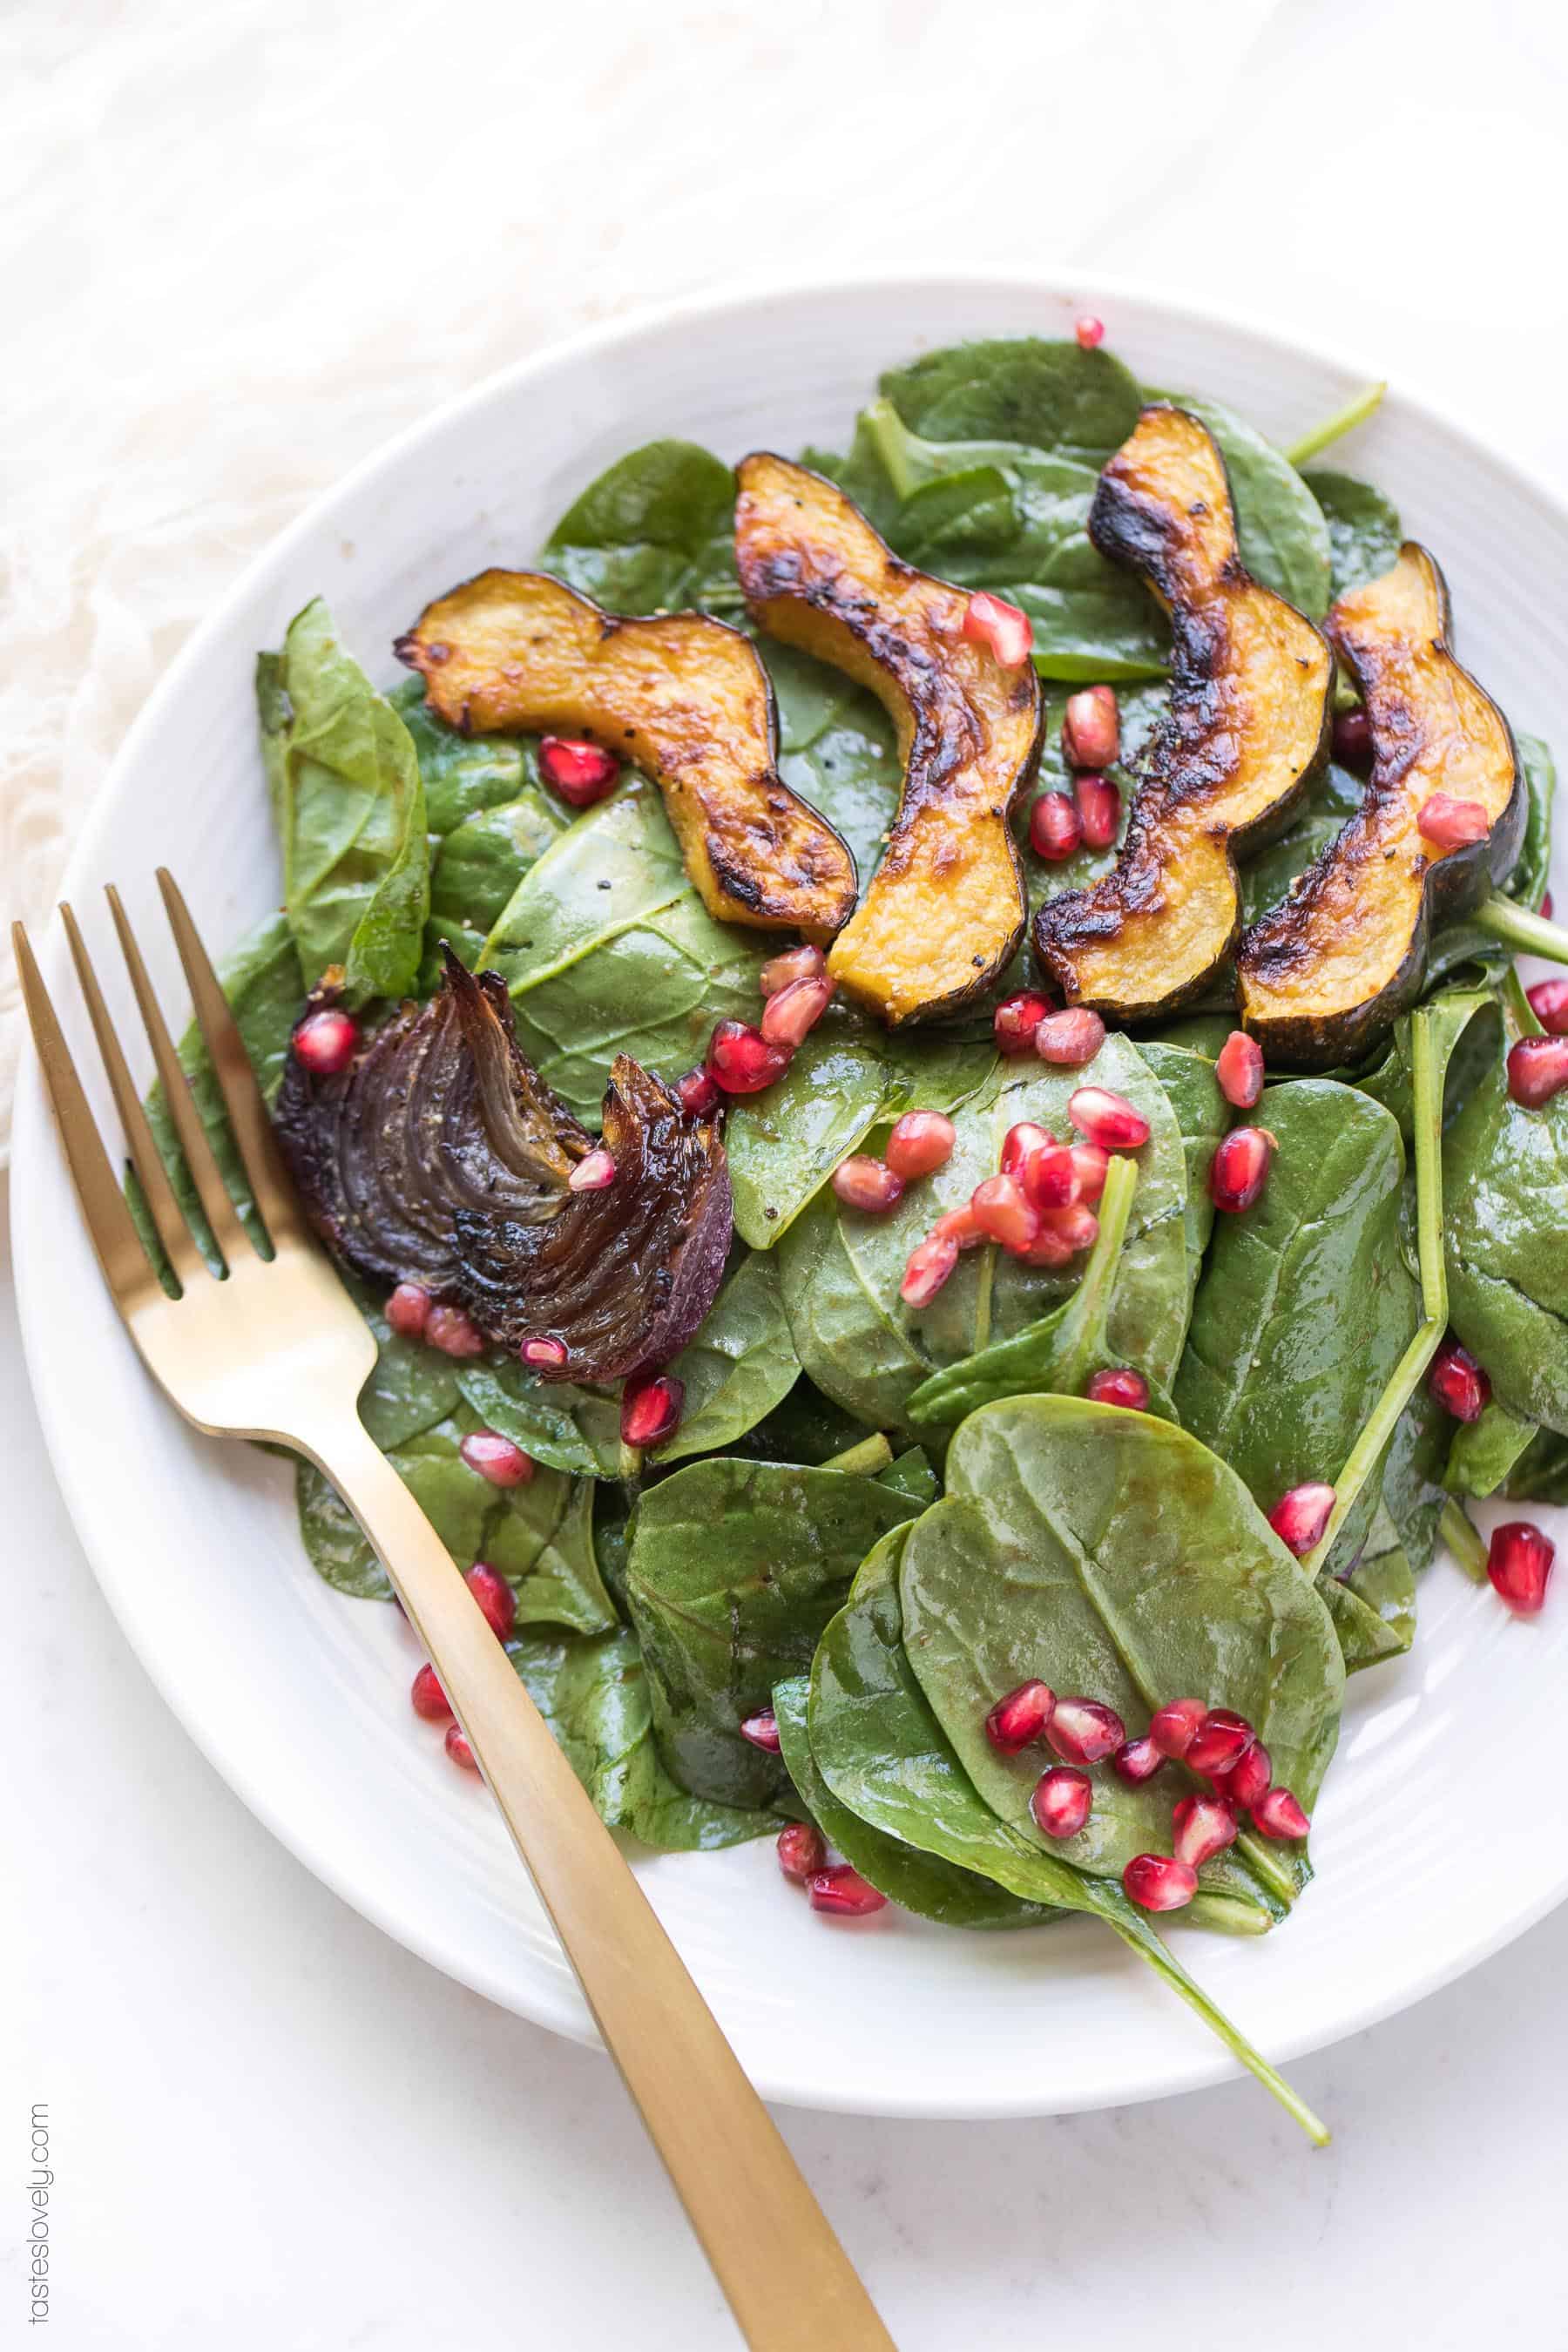 Spinach salad with roasted acorn squash, onions and pomegranates